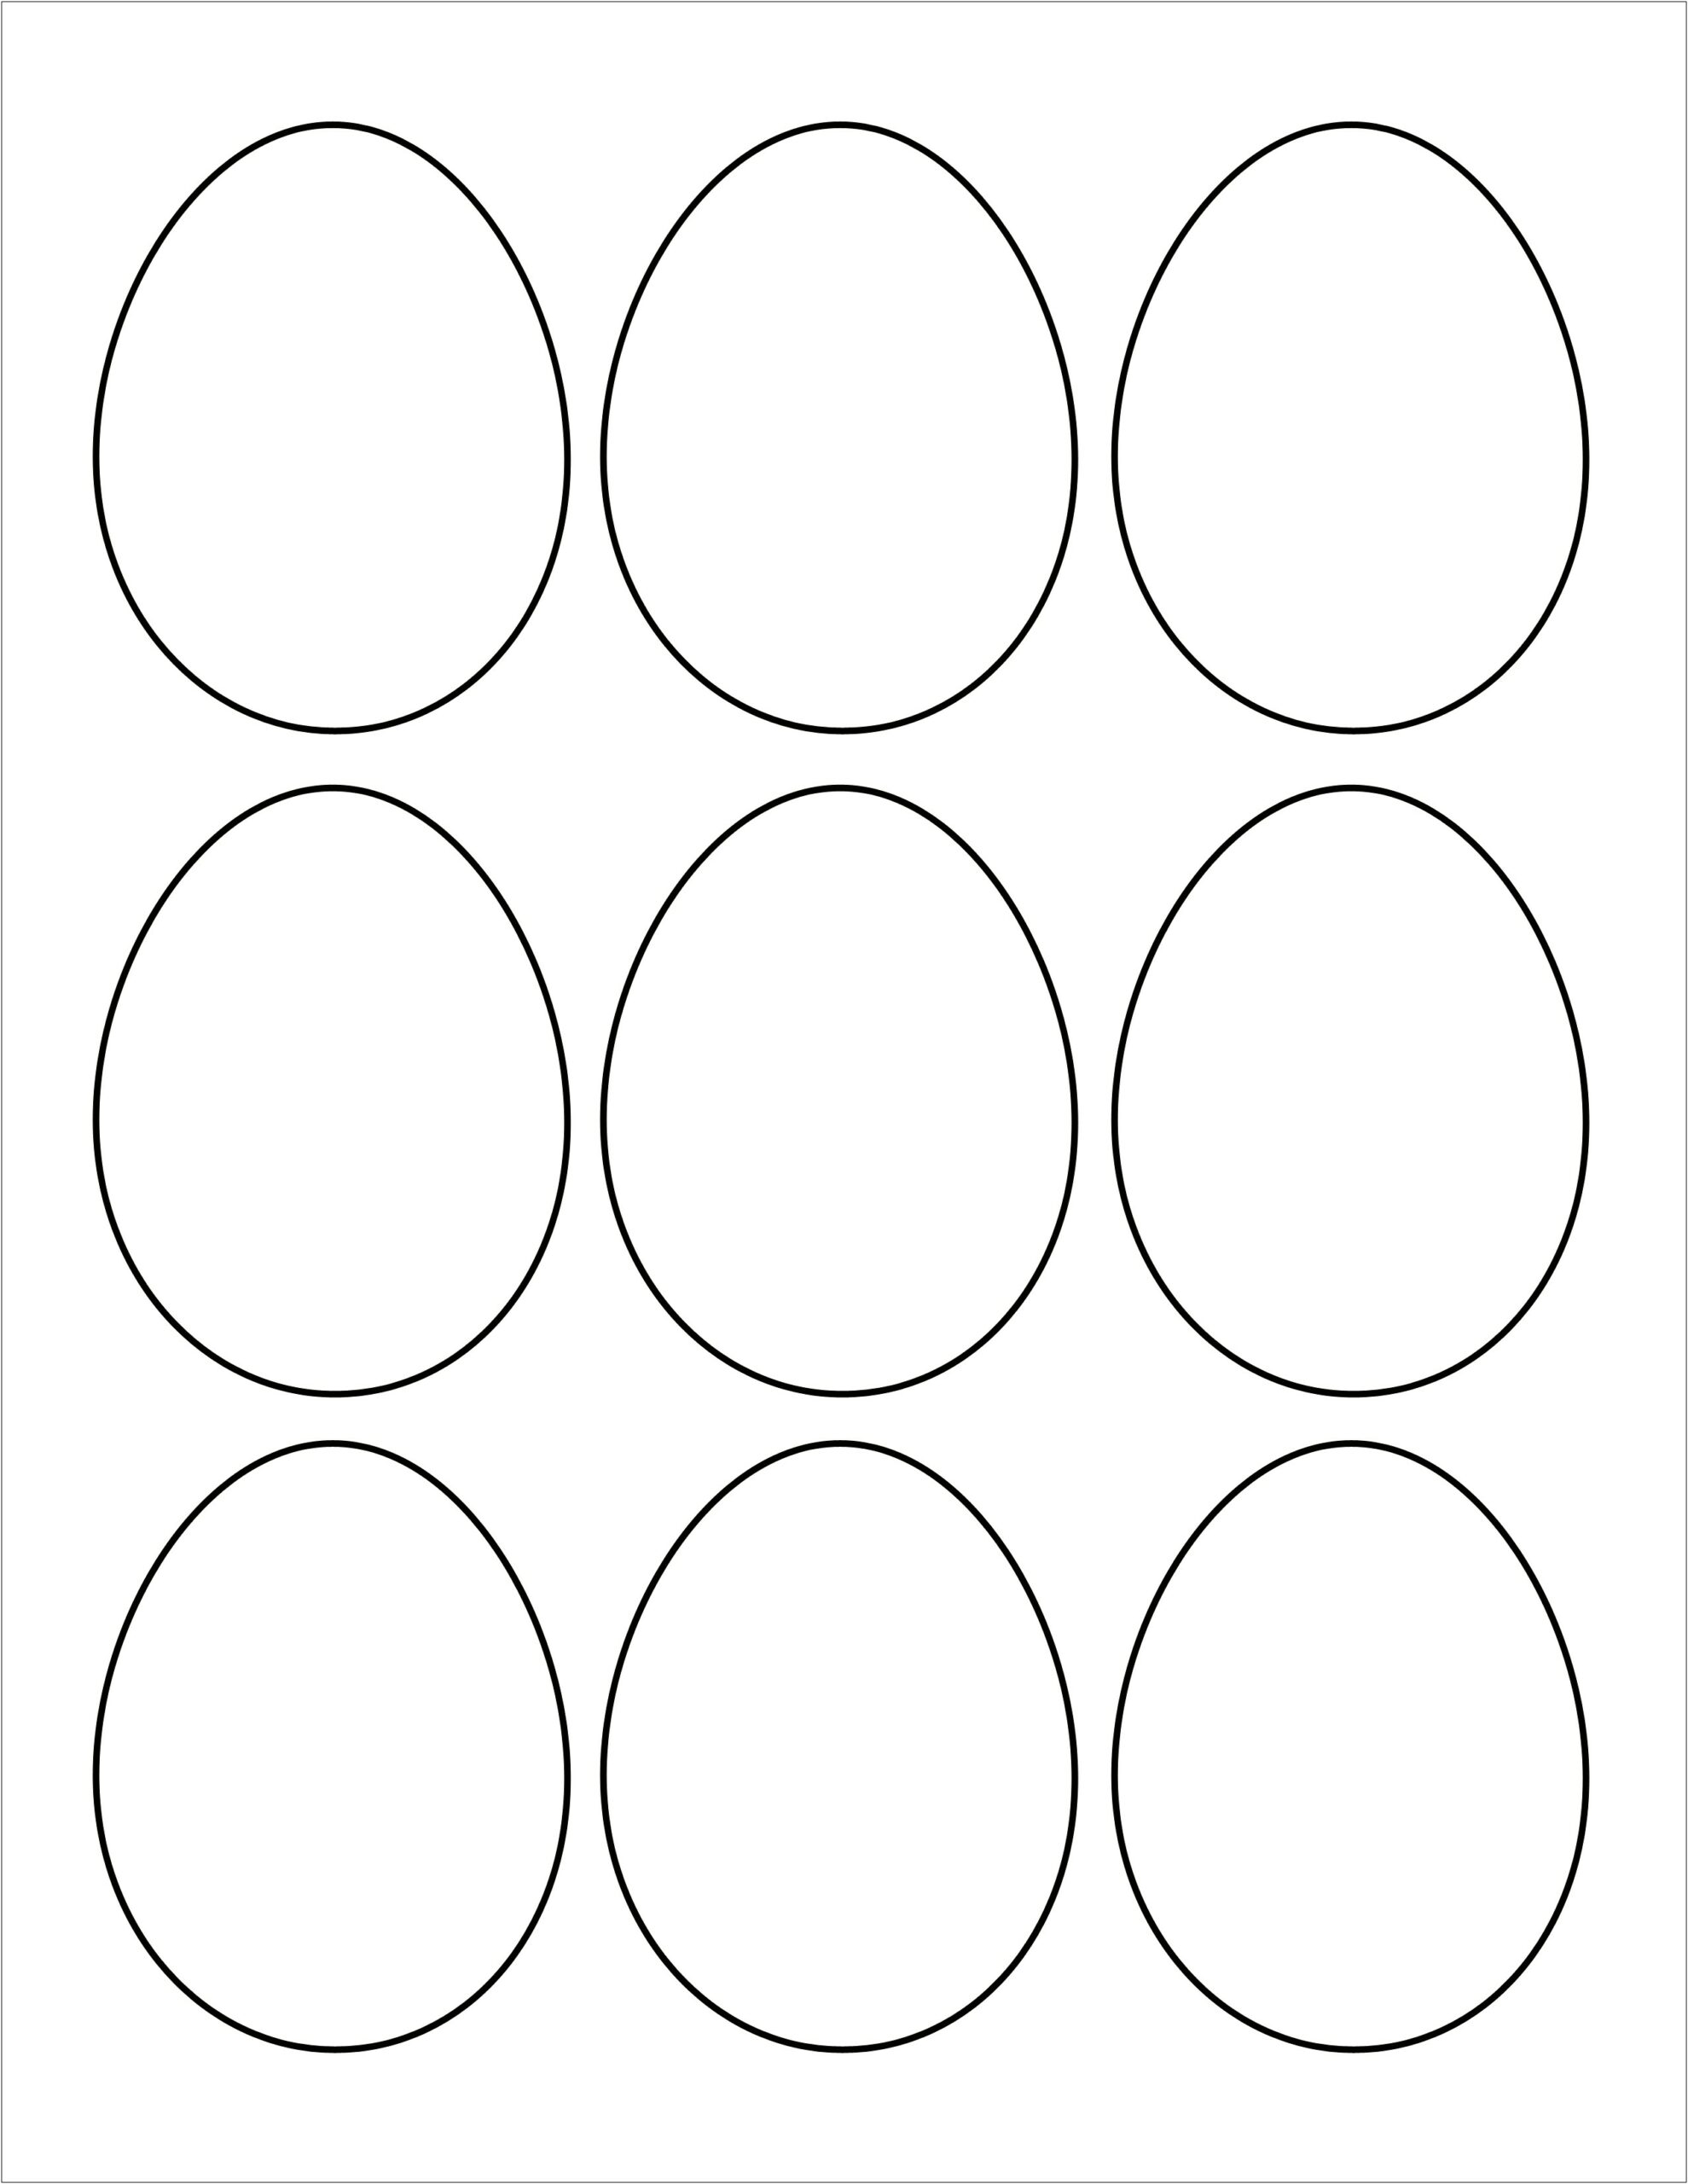 Dice With Color Eggs Template Free